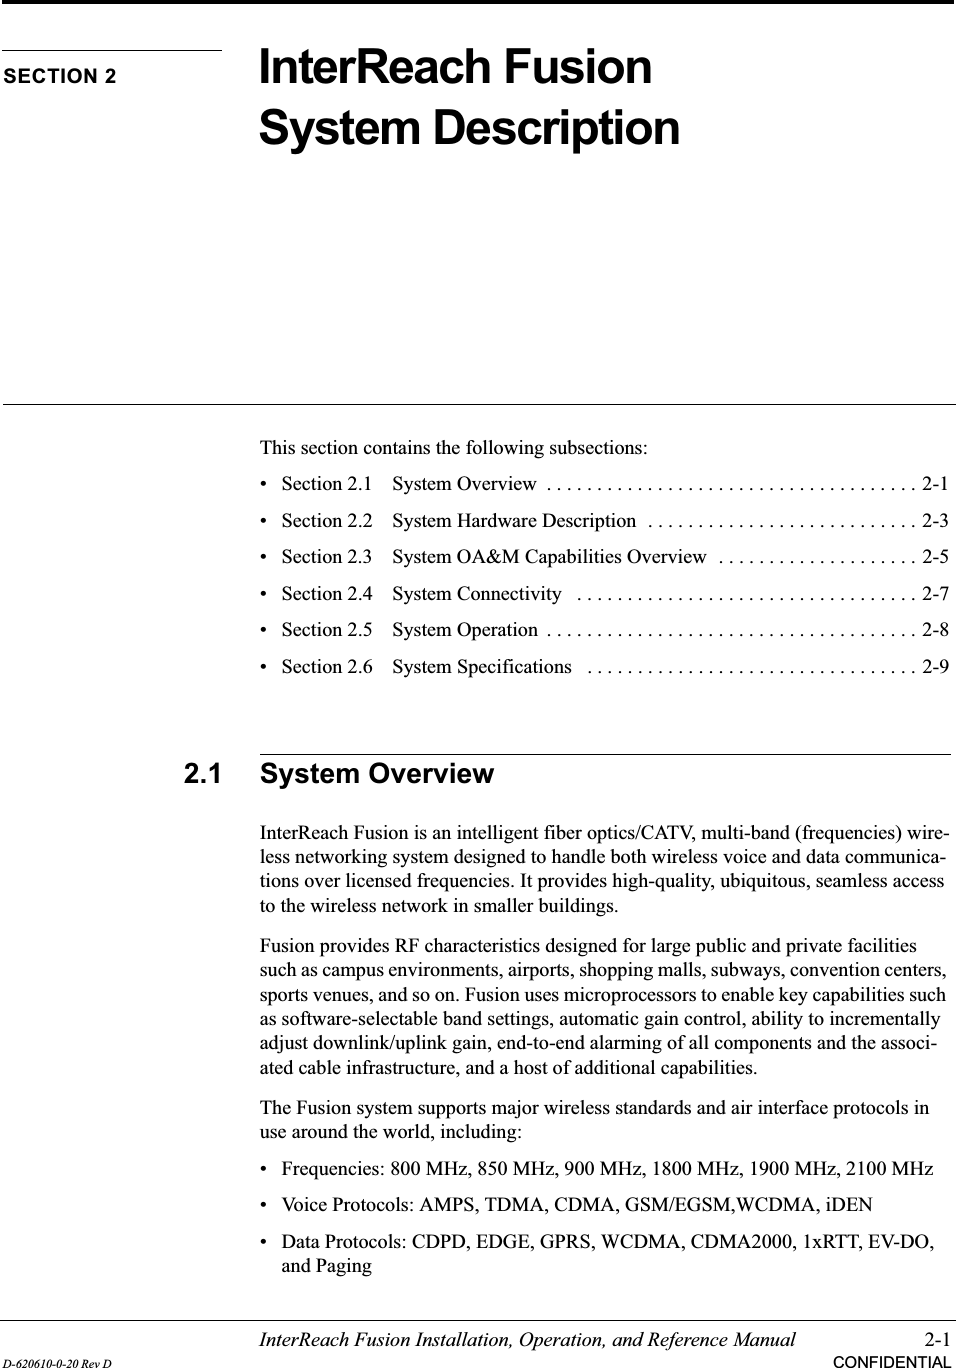 InterReach Fusion Installation, Operation, and Reference Manual 2-1D-620610-0-20 Rev D CONFIDENTIALSECTION 2 InterReach Fusion System DescriptionThis section contains the following subsections:• Section 2.1   System Overview  . . . . . . . . . . . . . . . . . . . . . . . . . . . . . . . . . . . . . 2-1• Section 2.2   System Hardware Description  . . . . . . . . . . . . . . . . . . . . . . . . . . . 2-3• Section 2.3   System OA&amp;M Capabilities Overview  . . . . . . . . . . . . . . . . . . . . 2-5• Section 2.4   System Connectivity   . . . . . . . . . . . . . . . . . . . . . . . . . . . . . . . . . . 2-7• Section 2.5   System Operation  . . . . . . . . . . . . . . . . . . . . . . . . . . . . . . . . . . . . . 2-8• Section 2.6   System Specifications   . . . . . . . . . . . . . . . . . . . . . . . . . . . . . . . . . 2-92.1 System OverviewInterReach Fusion is an intelligent fiber optics/CATV, multi-band (frequencies) wire-less networking system designed to handle both wireless voice and data communica-tions over licensed frequencies. It provides high-quality, ubiquitous, seamless access to the wireless network in smaller buildings.Fusion provides RF characteristics designed for large public and private facilities such as campus environments, airports, shopping malls, subways, convention centers, sports venues, and so on. Fusion uses microprocessors to enable key capabilities such as software-selectable band settings, automatic gain control, ability to incrementally adjust downlink/uplink gain, end-to-end alarming of all components and the associ-ated cable infrastructure, and a host of additional capabilities.The Fusion system supports major wireless standards and air interface protocols in use around the world, including:• Frequencies: 800 MHz, 850 MHz, 900 MHz, 1800 MHz, 1900 MHz, 2100 MHz• Voice Protocols: AMPS, TDMA, CDMA, GSM/EGSM,WCDMA, iDEN• Data Protocols: CDPD, EDGE, GPRS, WCDMA, CDMA2000, 1xRTT, EV-DO, and Paging